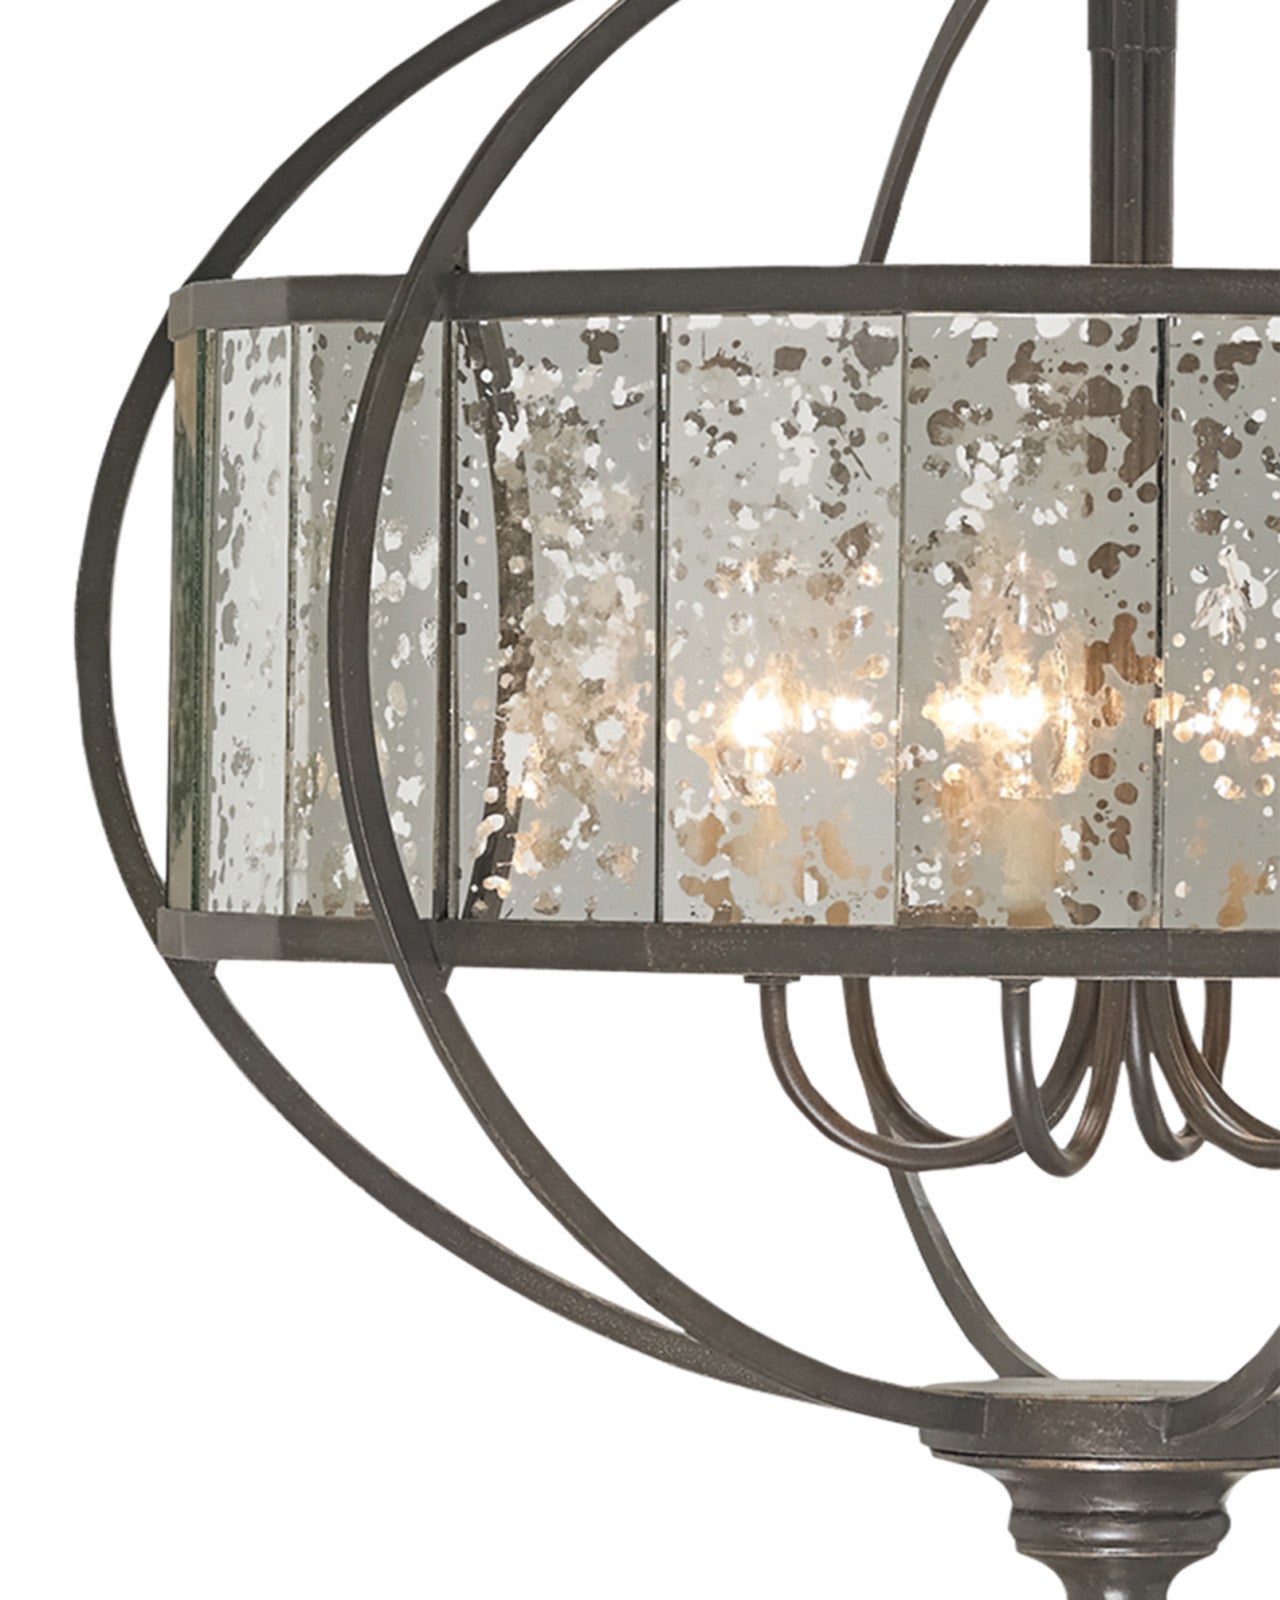 Florence Bronze Chandelier by Currey & Co.